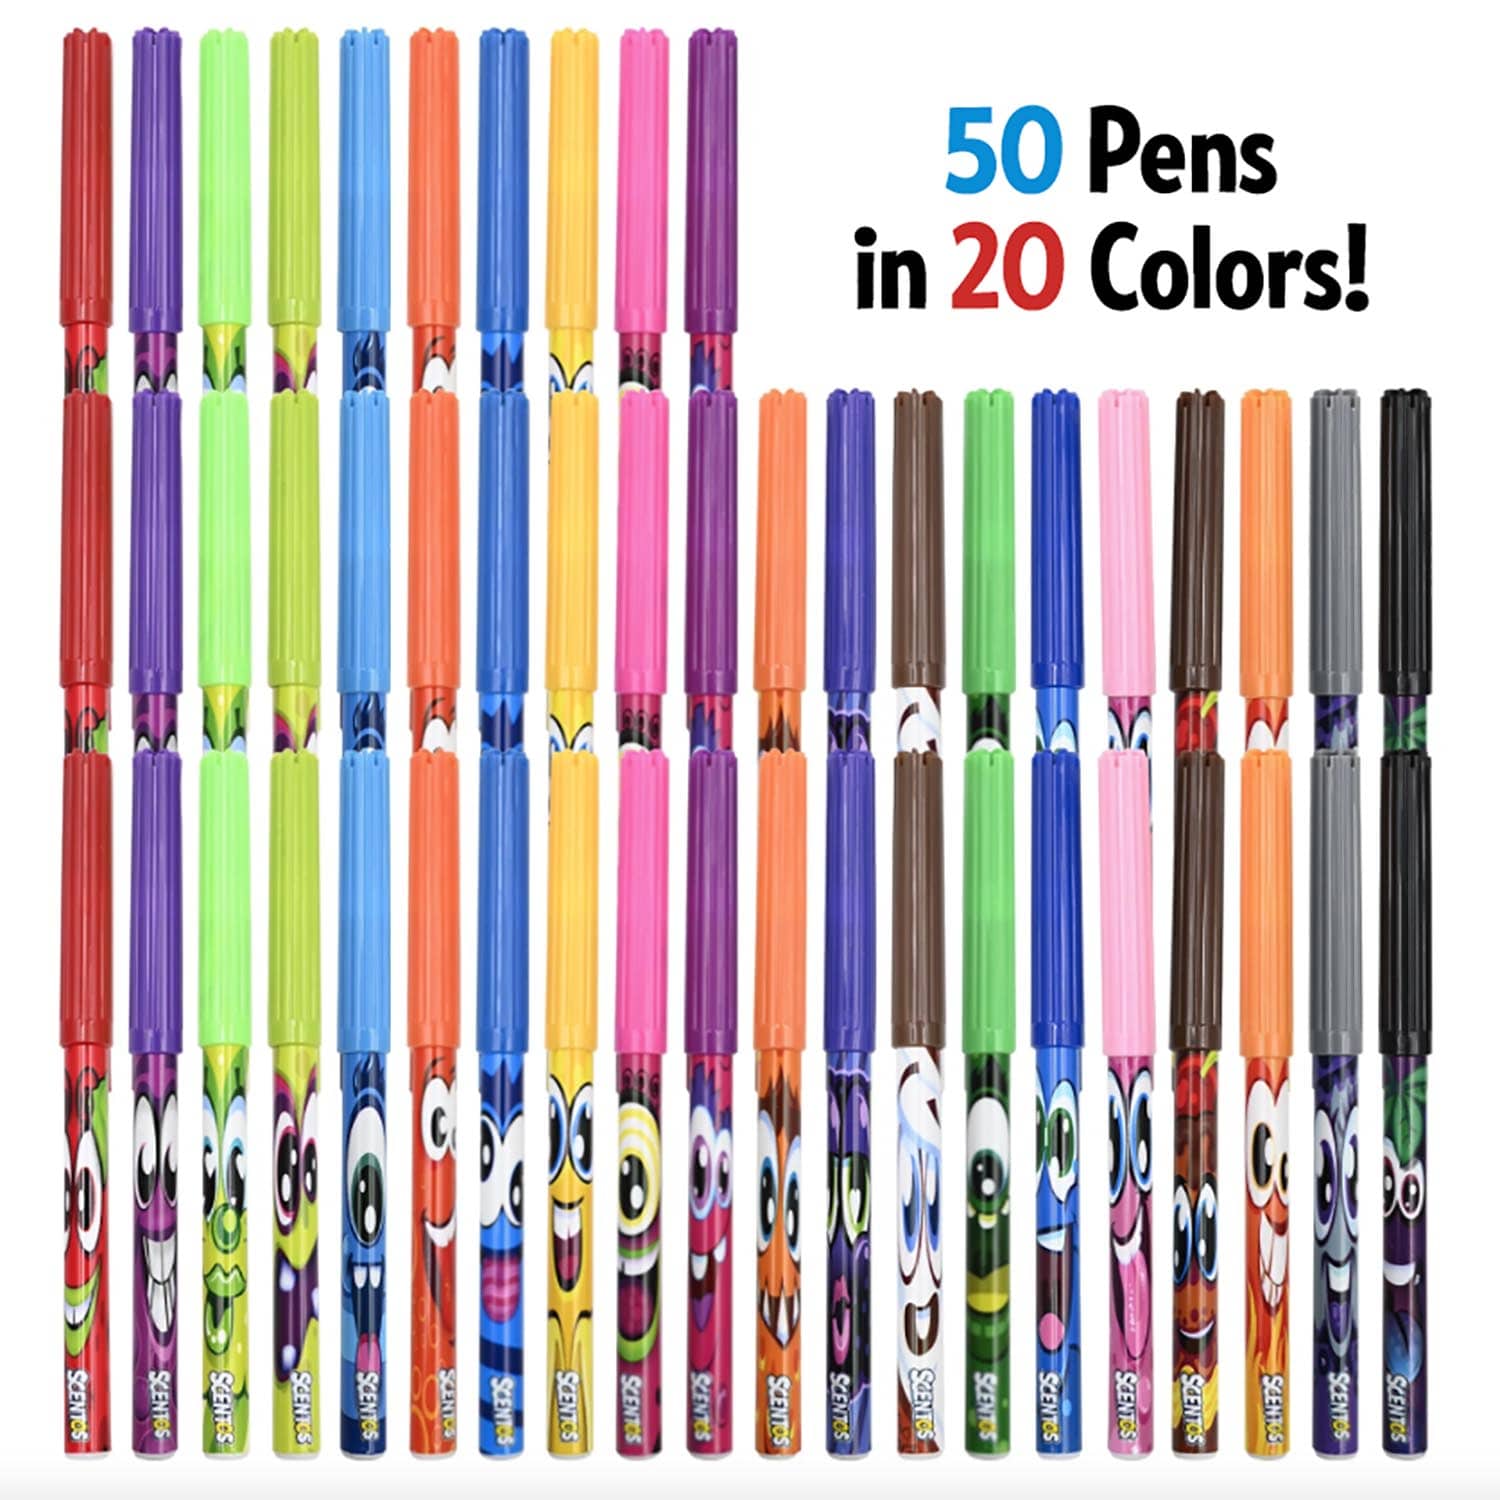 3+ Thousand Color Order Pencils Rainbow Royalty-Free Images, Stock